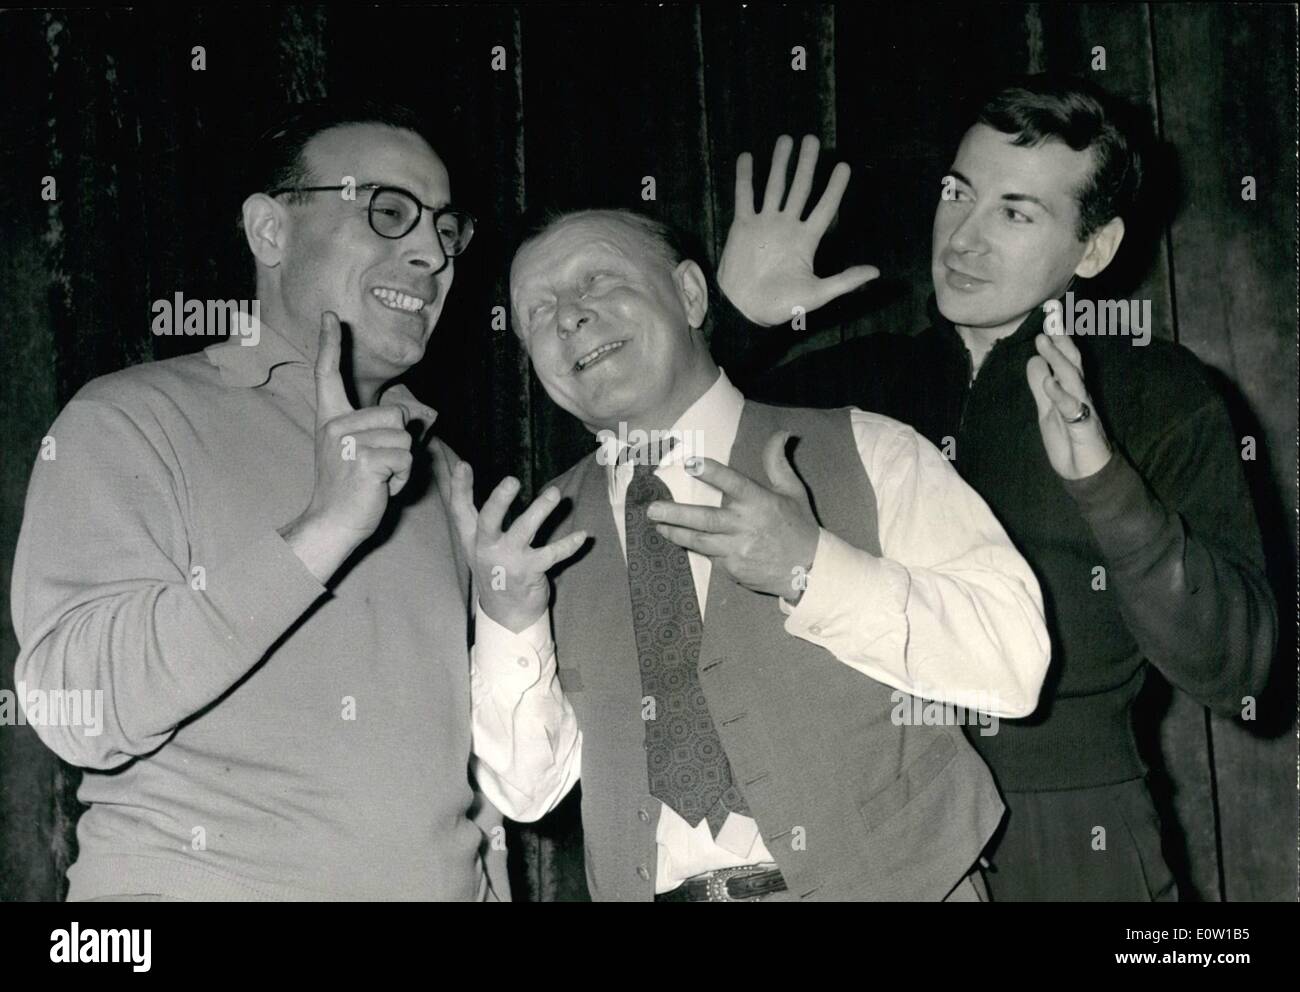 Nov. 11, 1960 - Charlie Rivel Back to Circus: Charlie Rivel, The Famous French Clown, Known as Grock's successor, is now back to the circus after an absence of over ten years. Photo Shows Charlie Rivel (center) pictured with two partners, Sandro Baldy (left) and Marcelly's at Medrano Circus this morning. Stock Photo